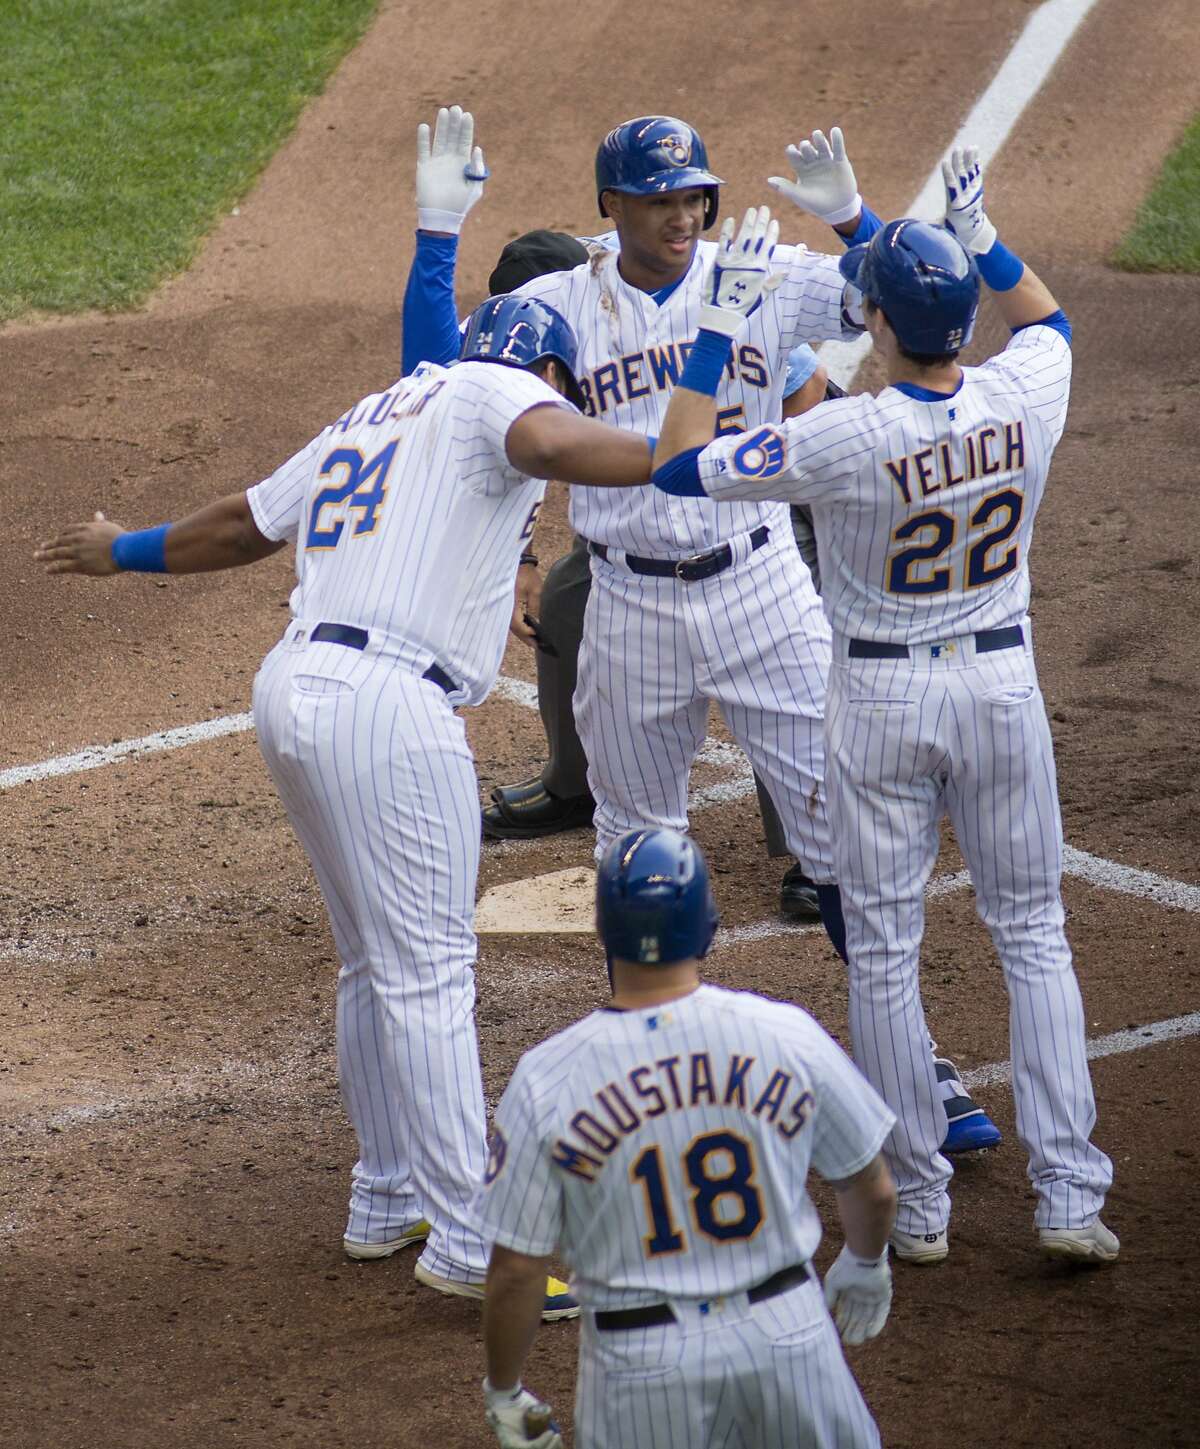 Milwaukee Brewers' Jonathan Schoop, top center, is congratulated by teammates after hitting a grand slam against the San Francisco Giants during the sixth inning of an baseball game Sunday, Sept. 9, 2018, in Milwaukee. (AP Photo/Darren Hauck)